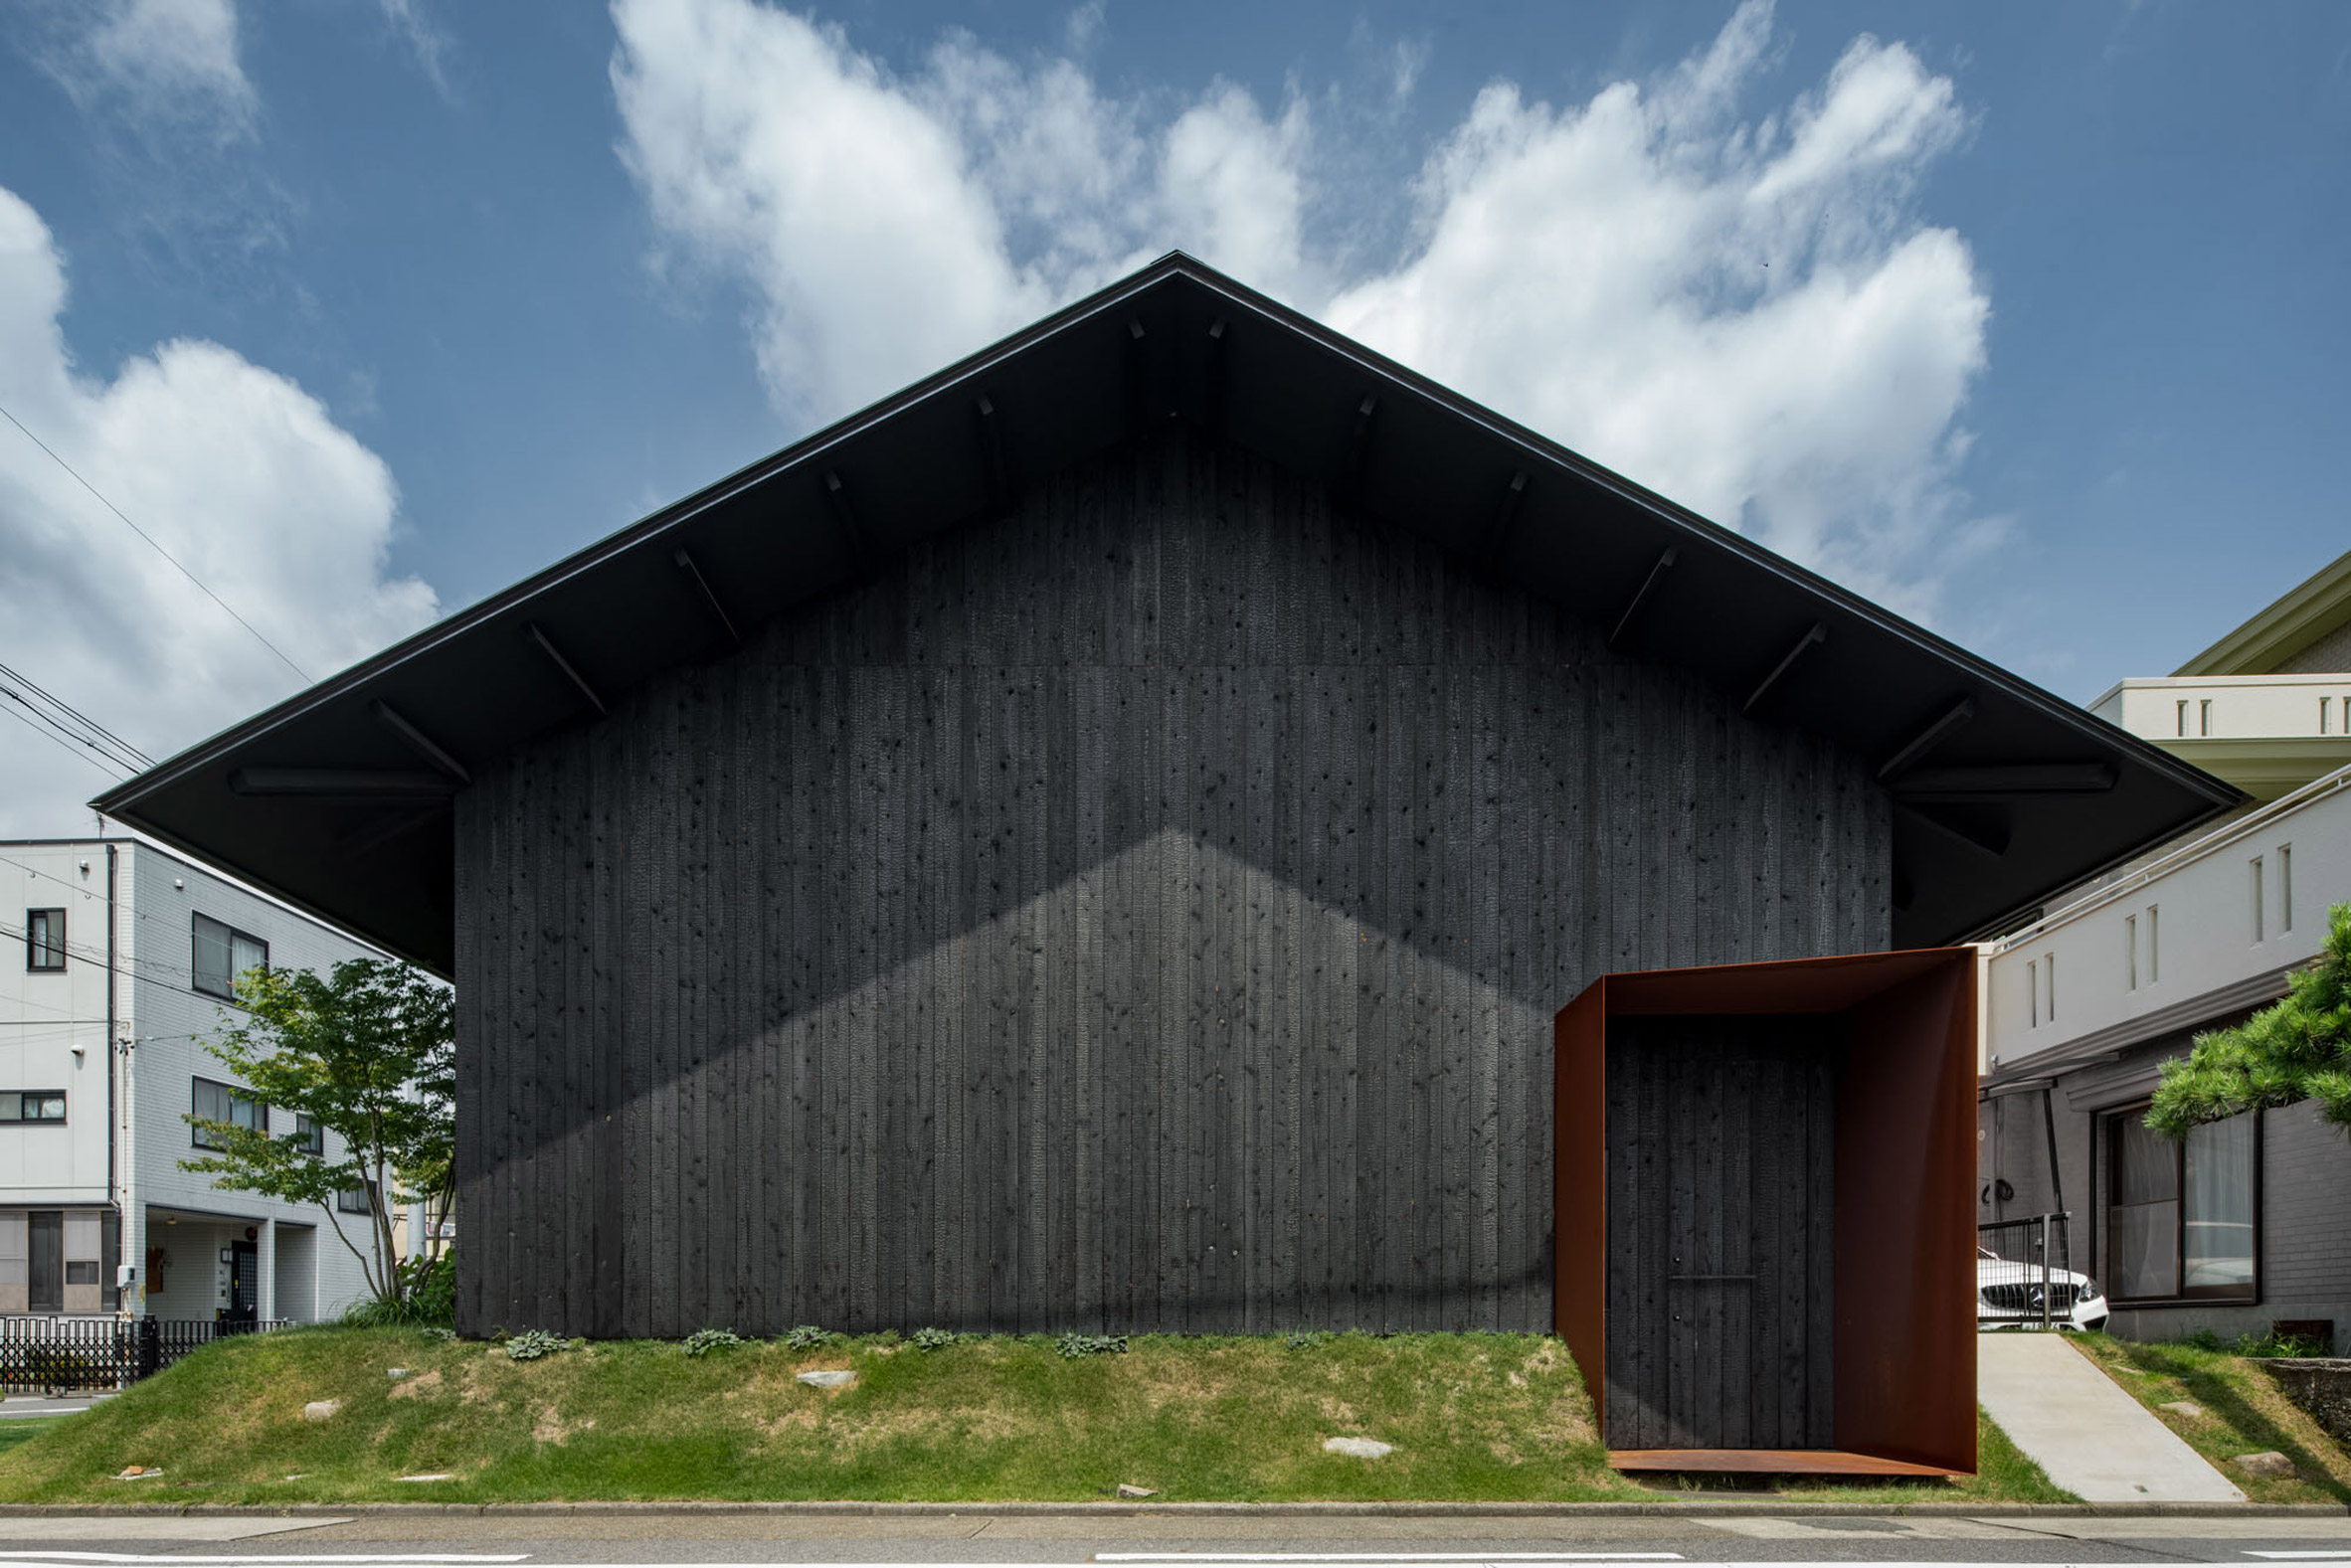 Facade view of Japanese home by Slow